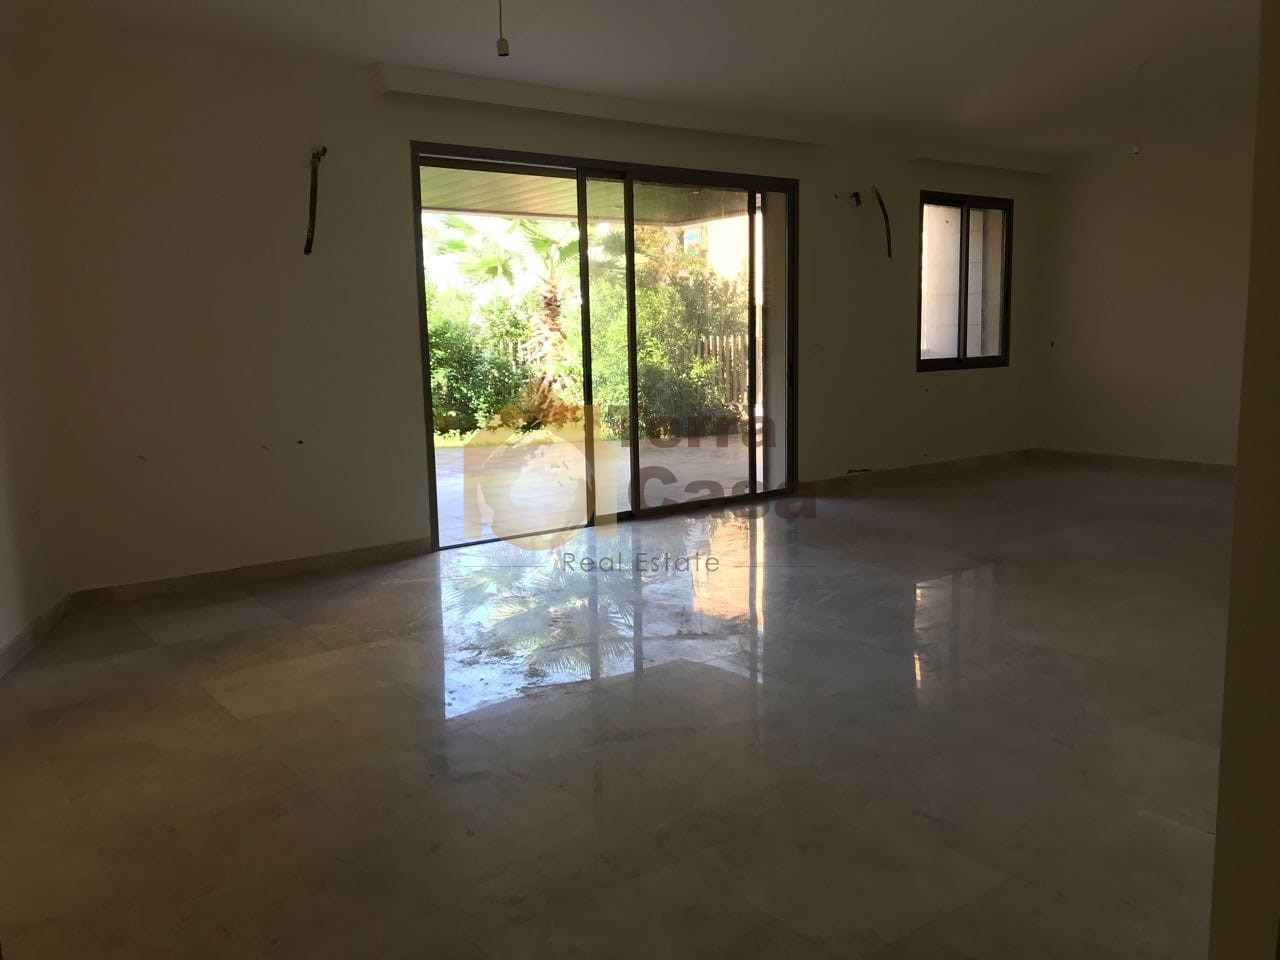 Apartment for sale in Deek el mehdi brand new with 86 sqm terrace .